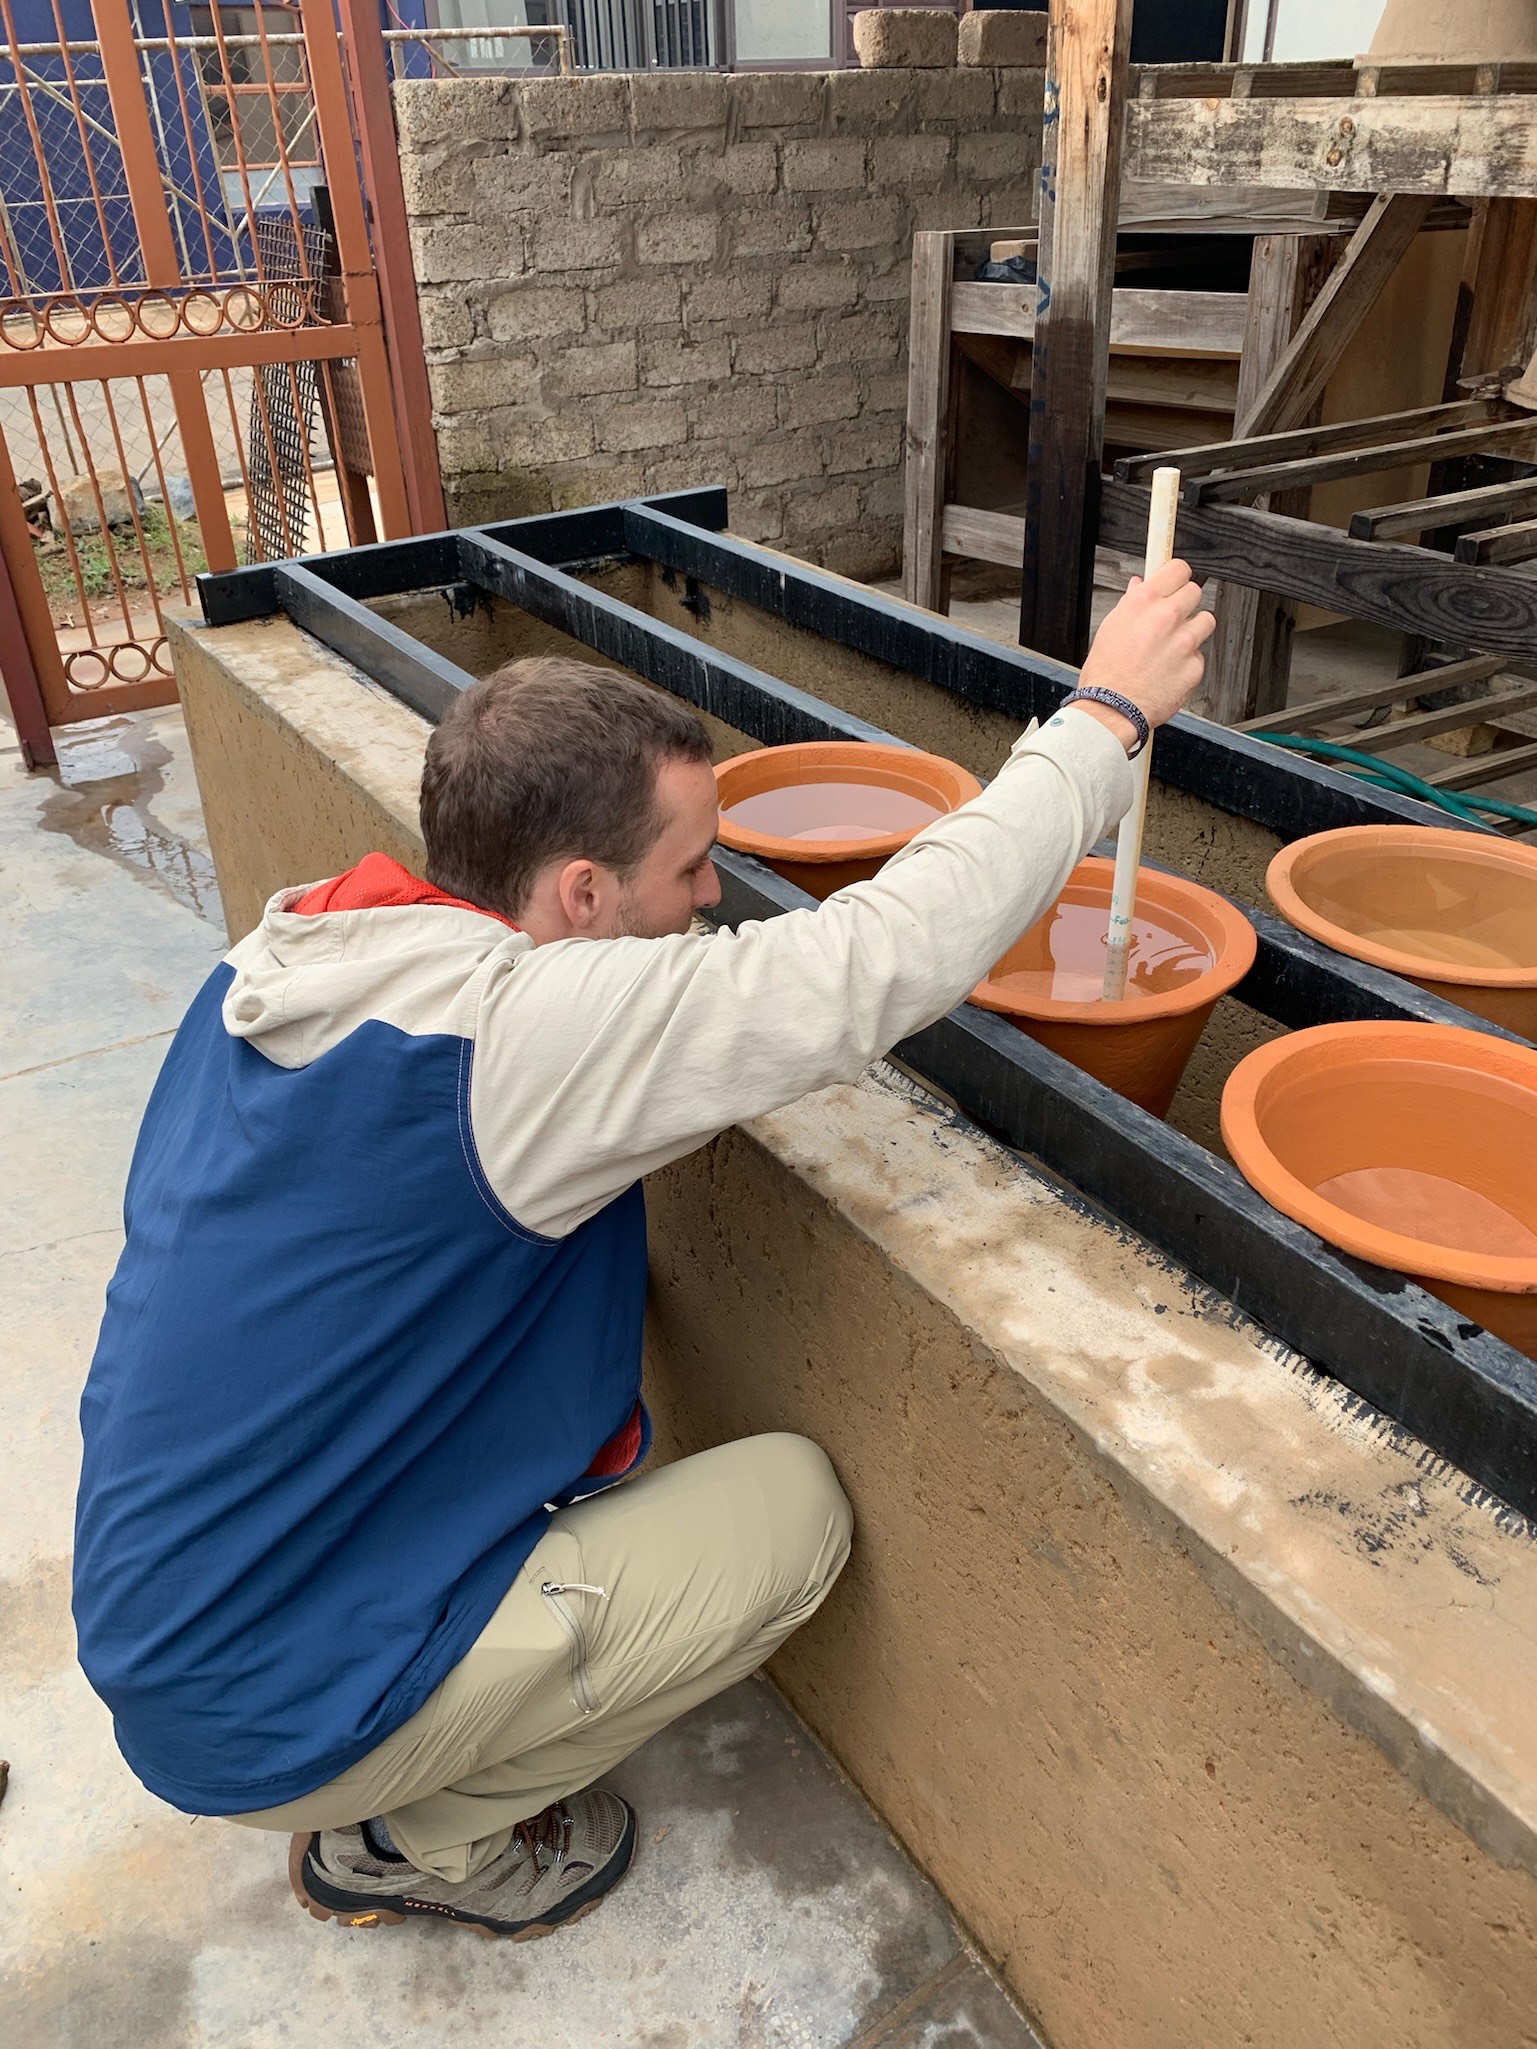 Hertel conducts point-of-use water treatment in Hammanskraal, South Africa, through professor James A. Smith’s water quality lab.